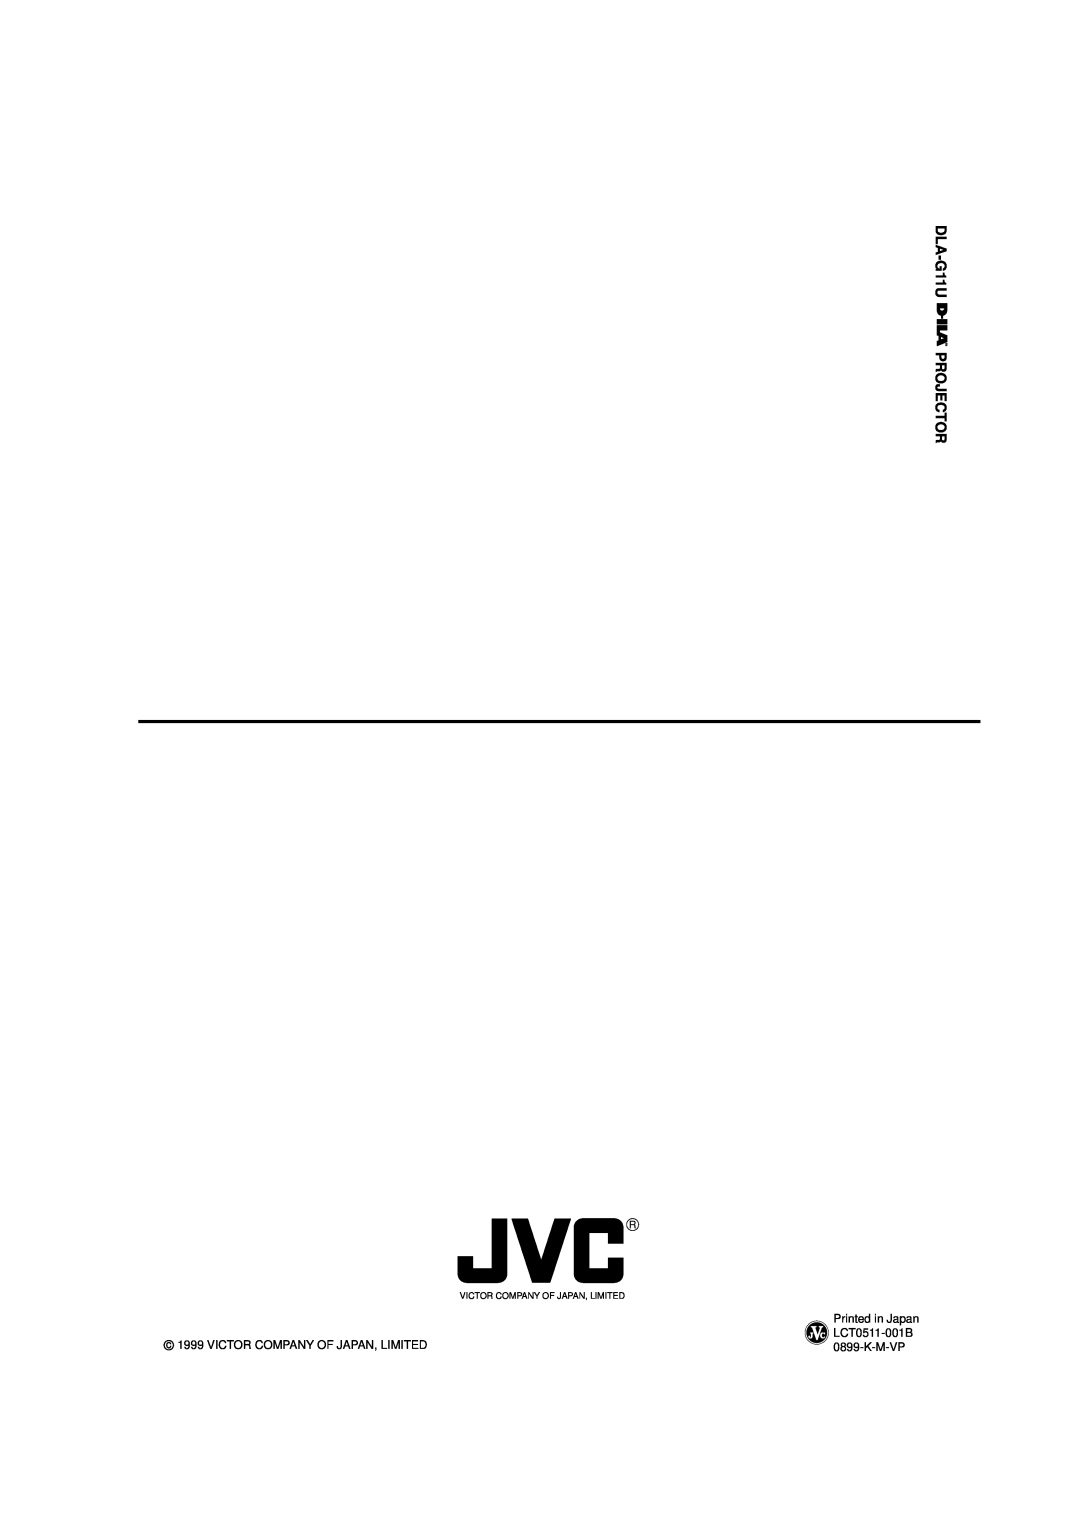 JVC manual DLA-G11U PROJECTOR, Printed in Japan, Victor Company Of Japan, Limited, LCT0511-001B, K-M-Vp 